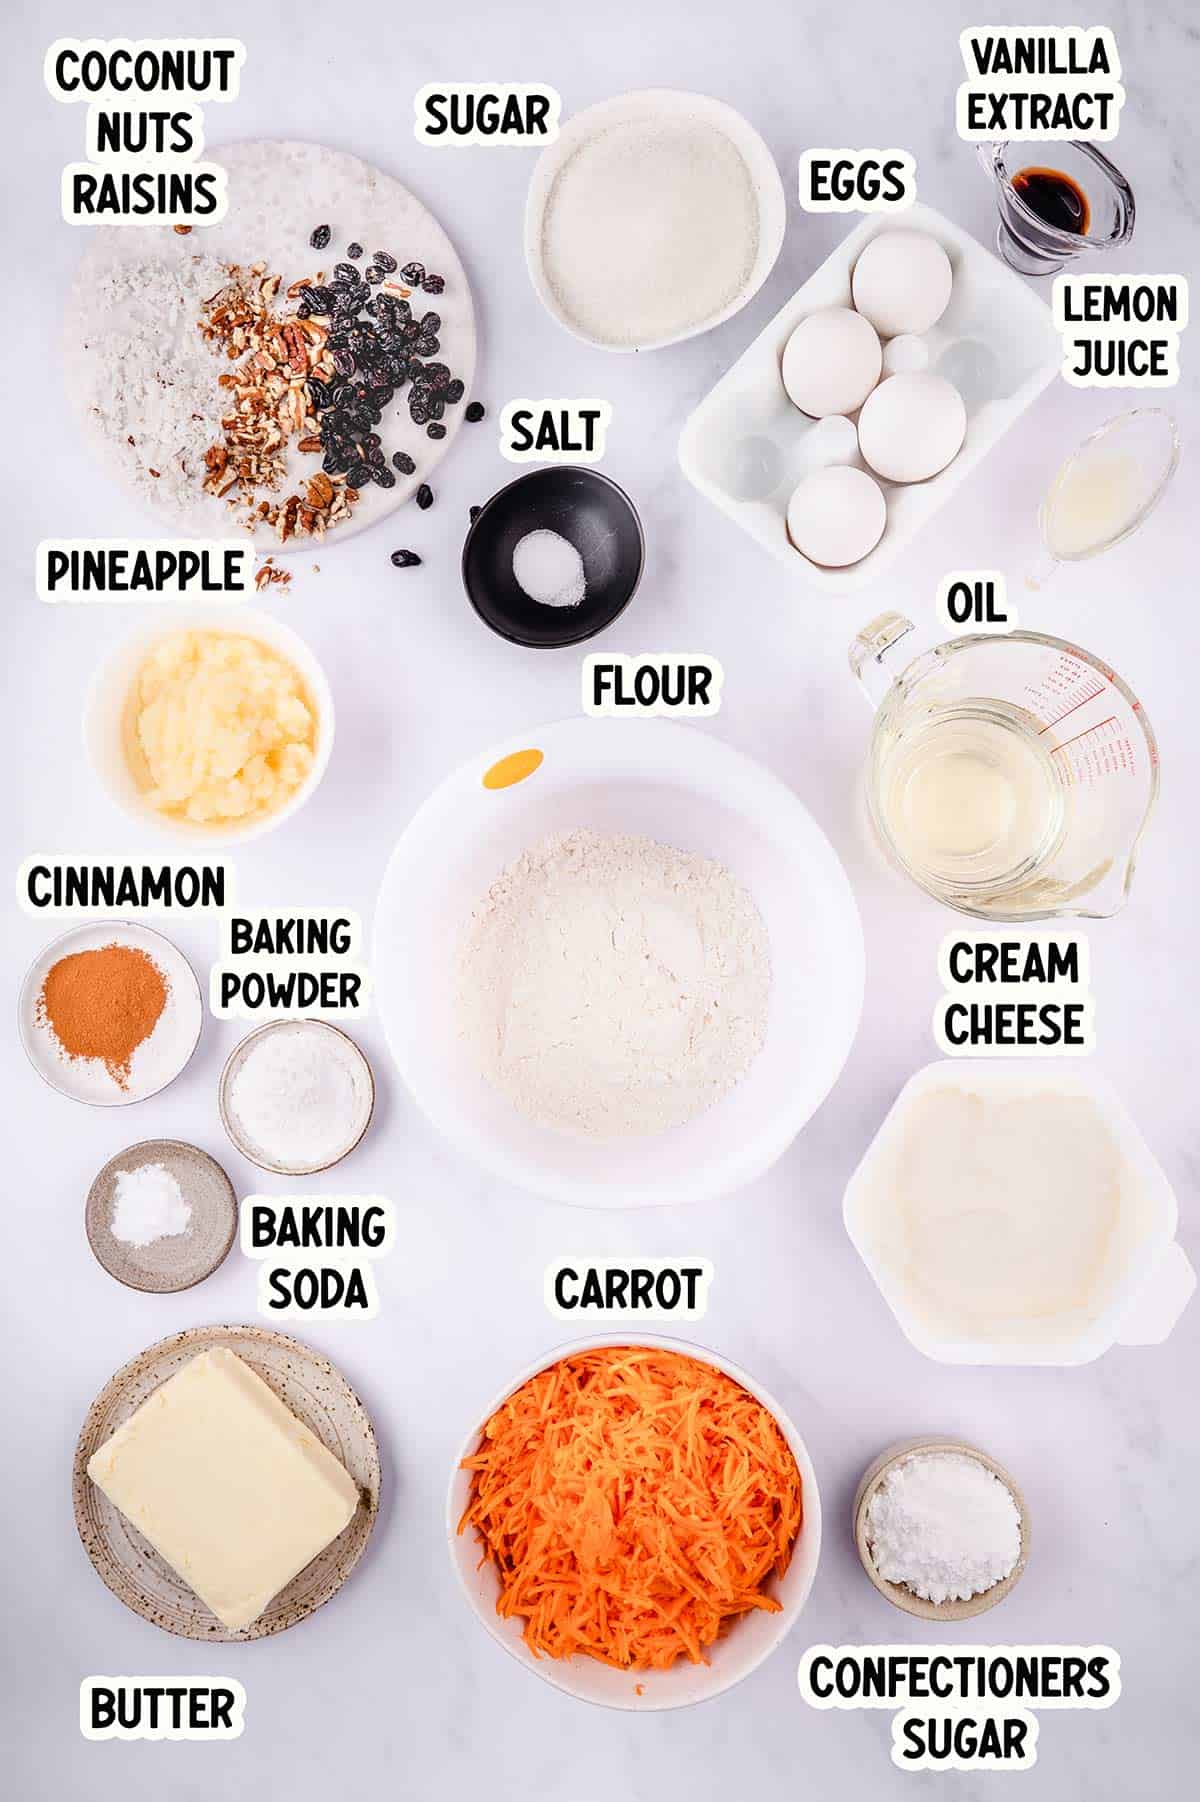 Ingredients for carrot cake with pineapple and coconut.